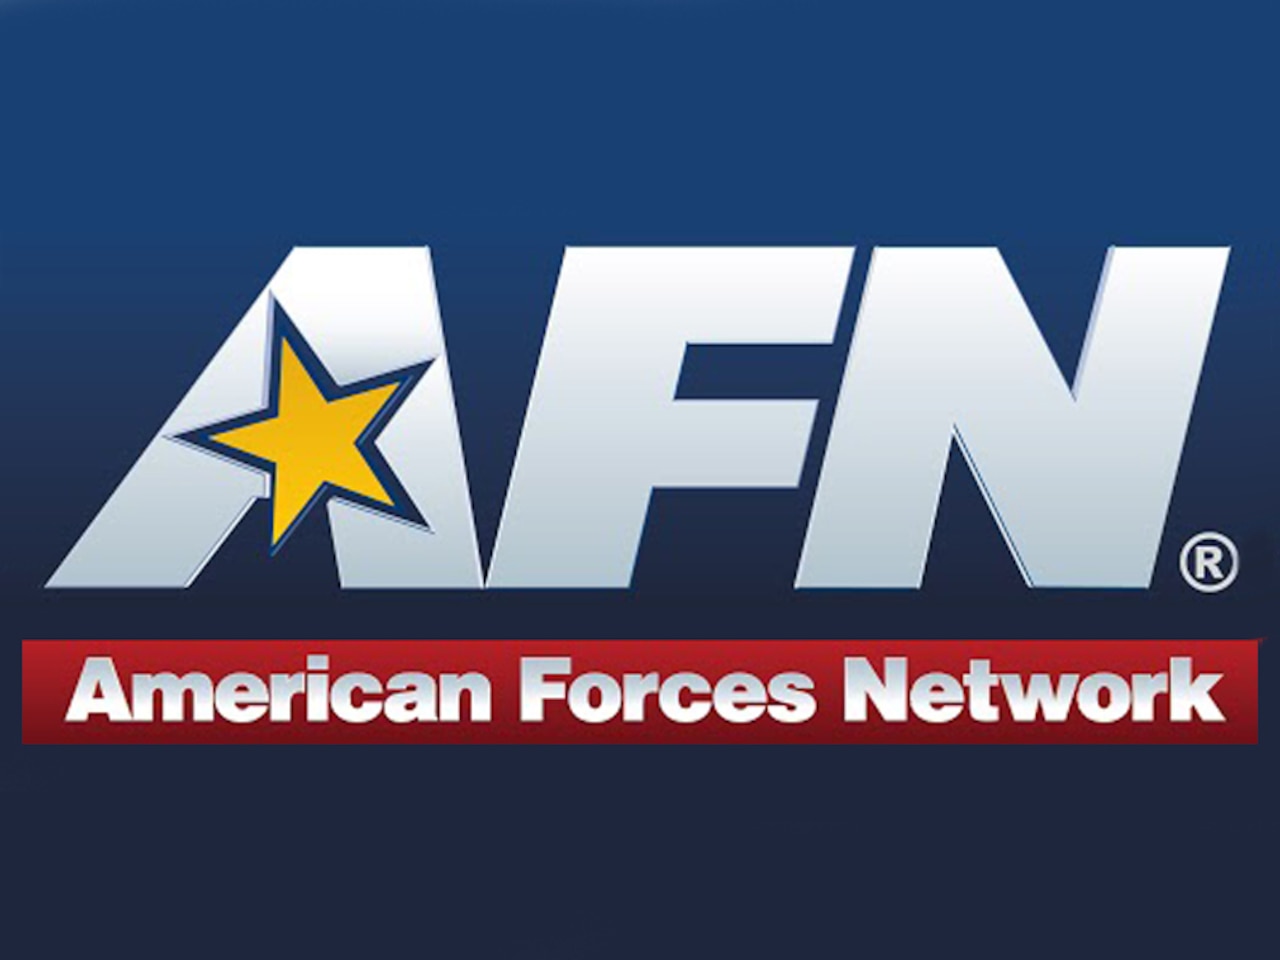 A logo says “AFN: American Forces Network.”